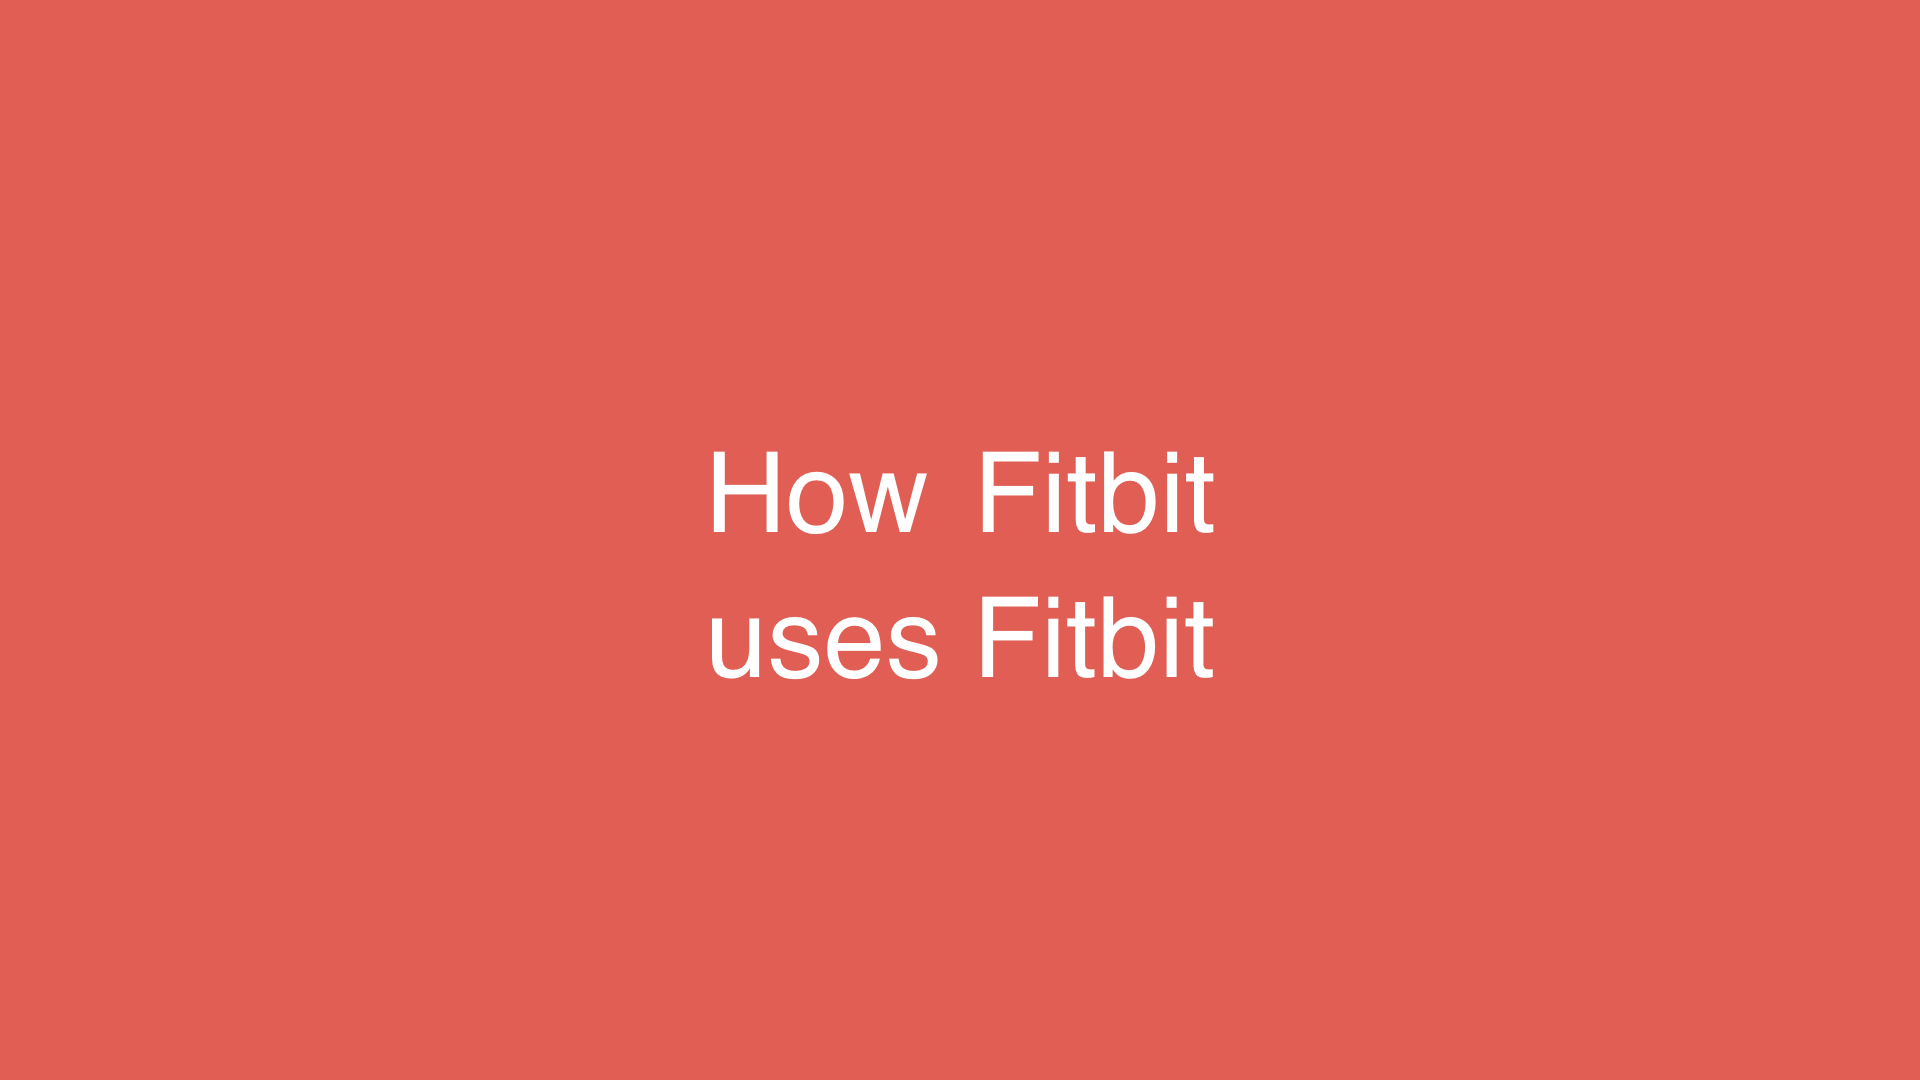 Text: how Fitbit uses Fitbit